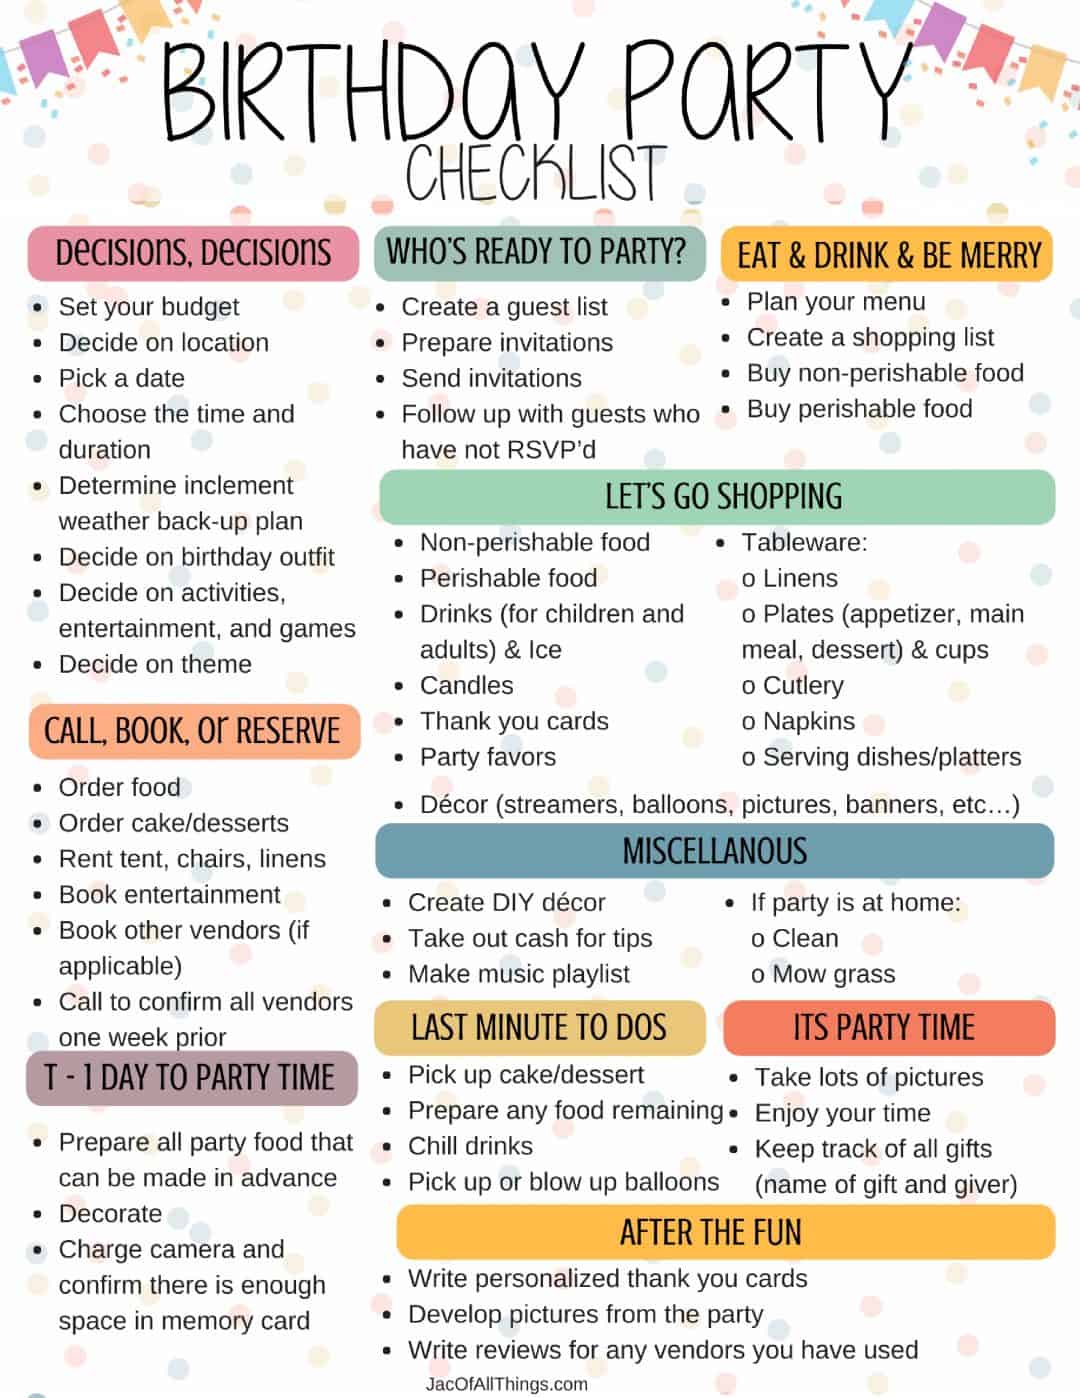 birthday-party-checklist-jac-of-all-things